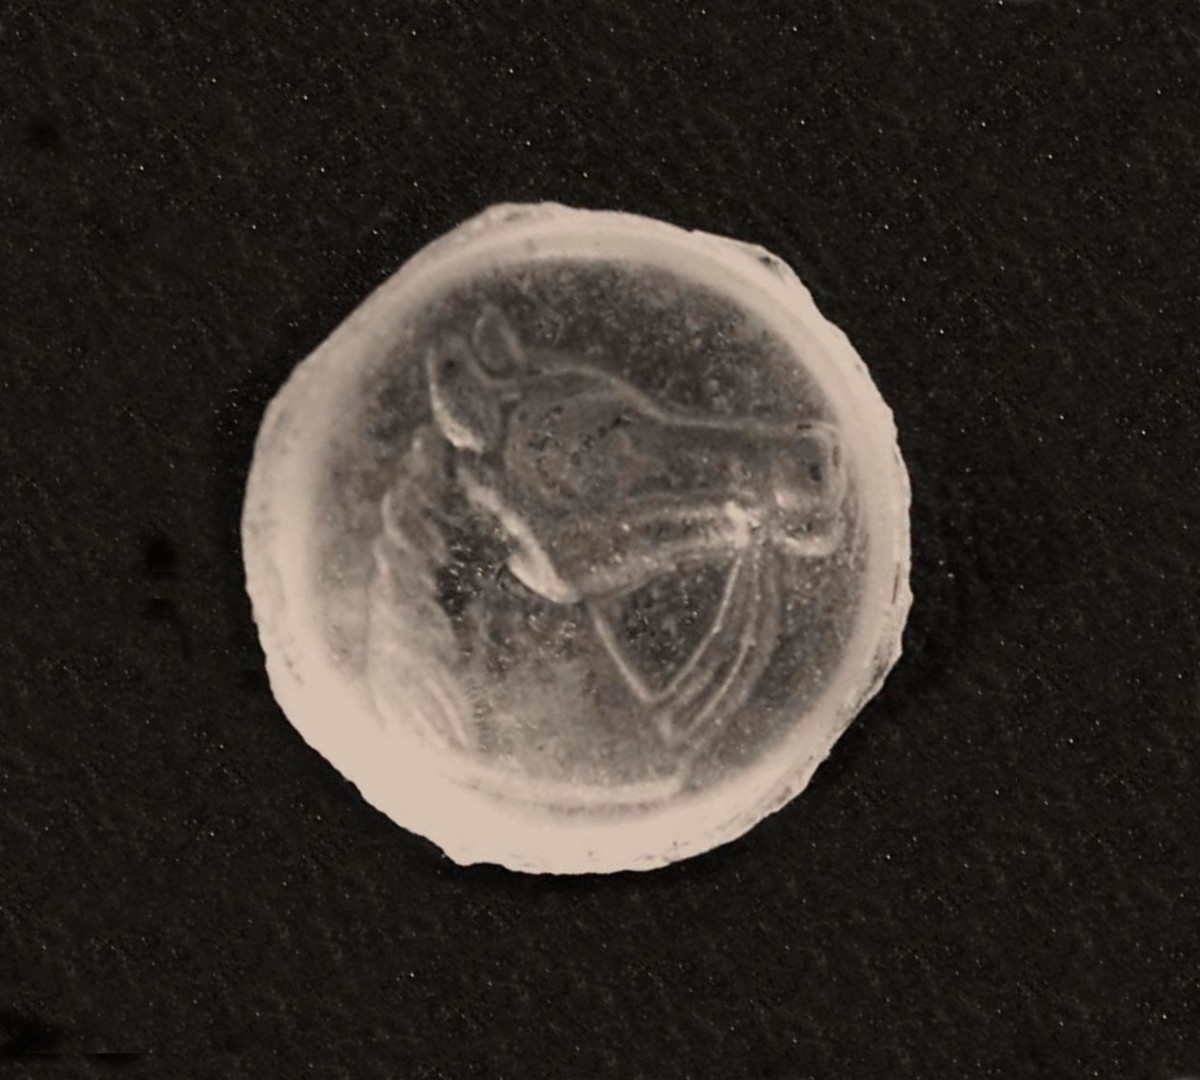 Fig. 8. Glass gemstone with engraved representation of horse with reins, possibly related to Thessalian dedicator. Thessalian cavalry was known and participated in the Greek (“Macedonian”) - Persian conflict on both sides.